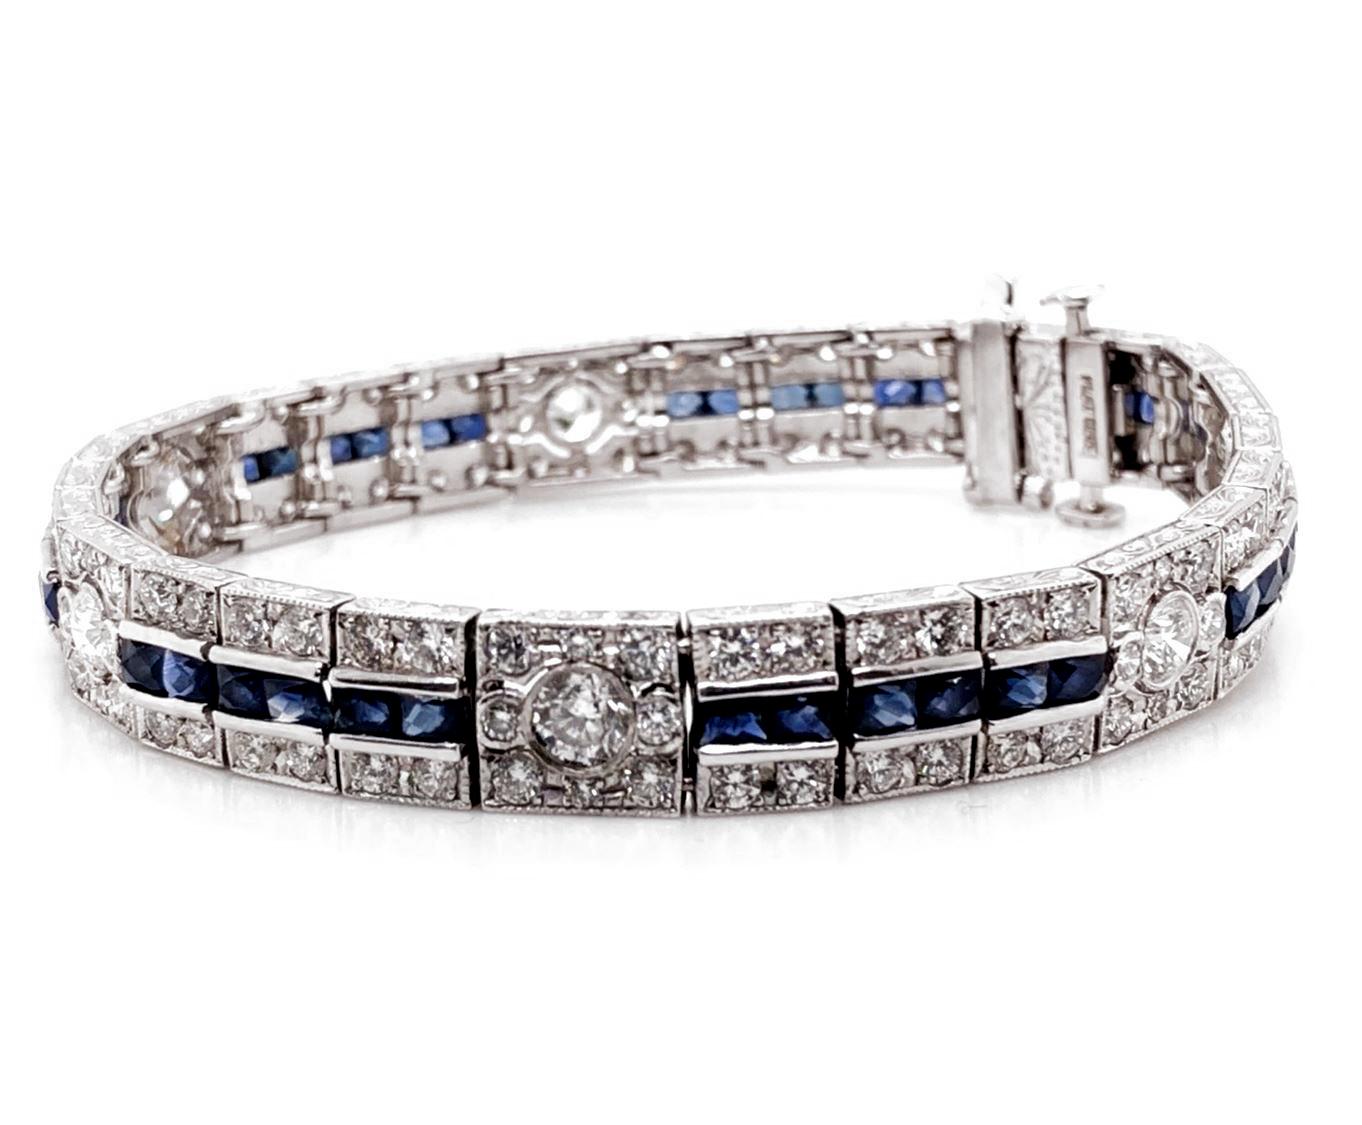 Ceylon French Cut Sapphires 6.14 Carat Diamonds Platinum Bracelet In New Condition For Sale In New York, NY